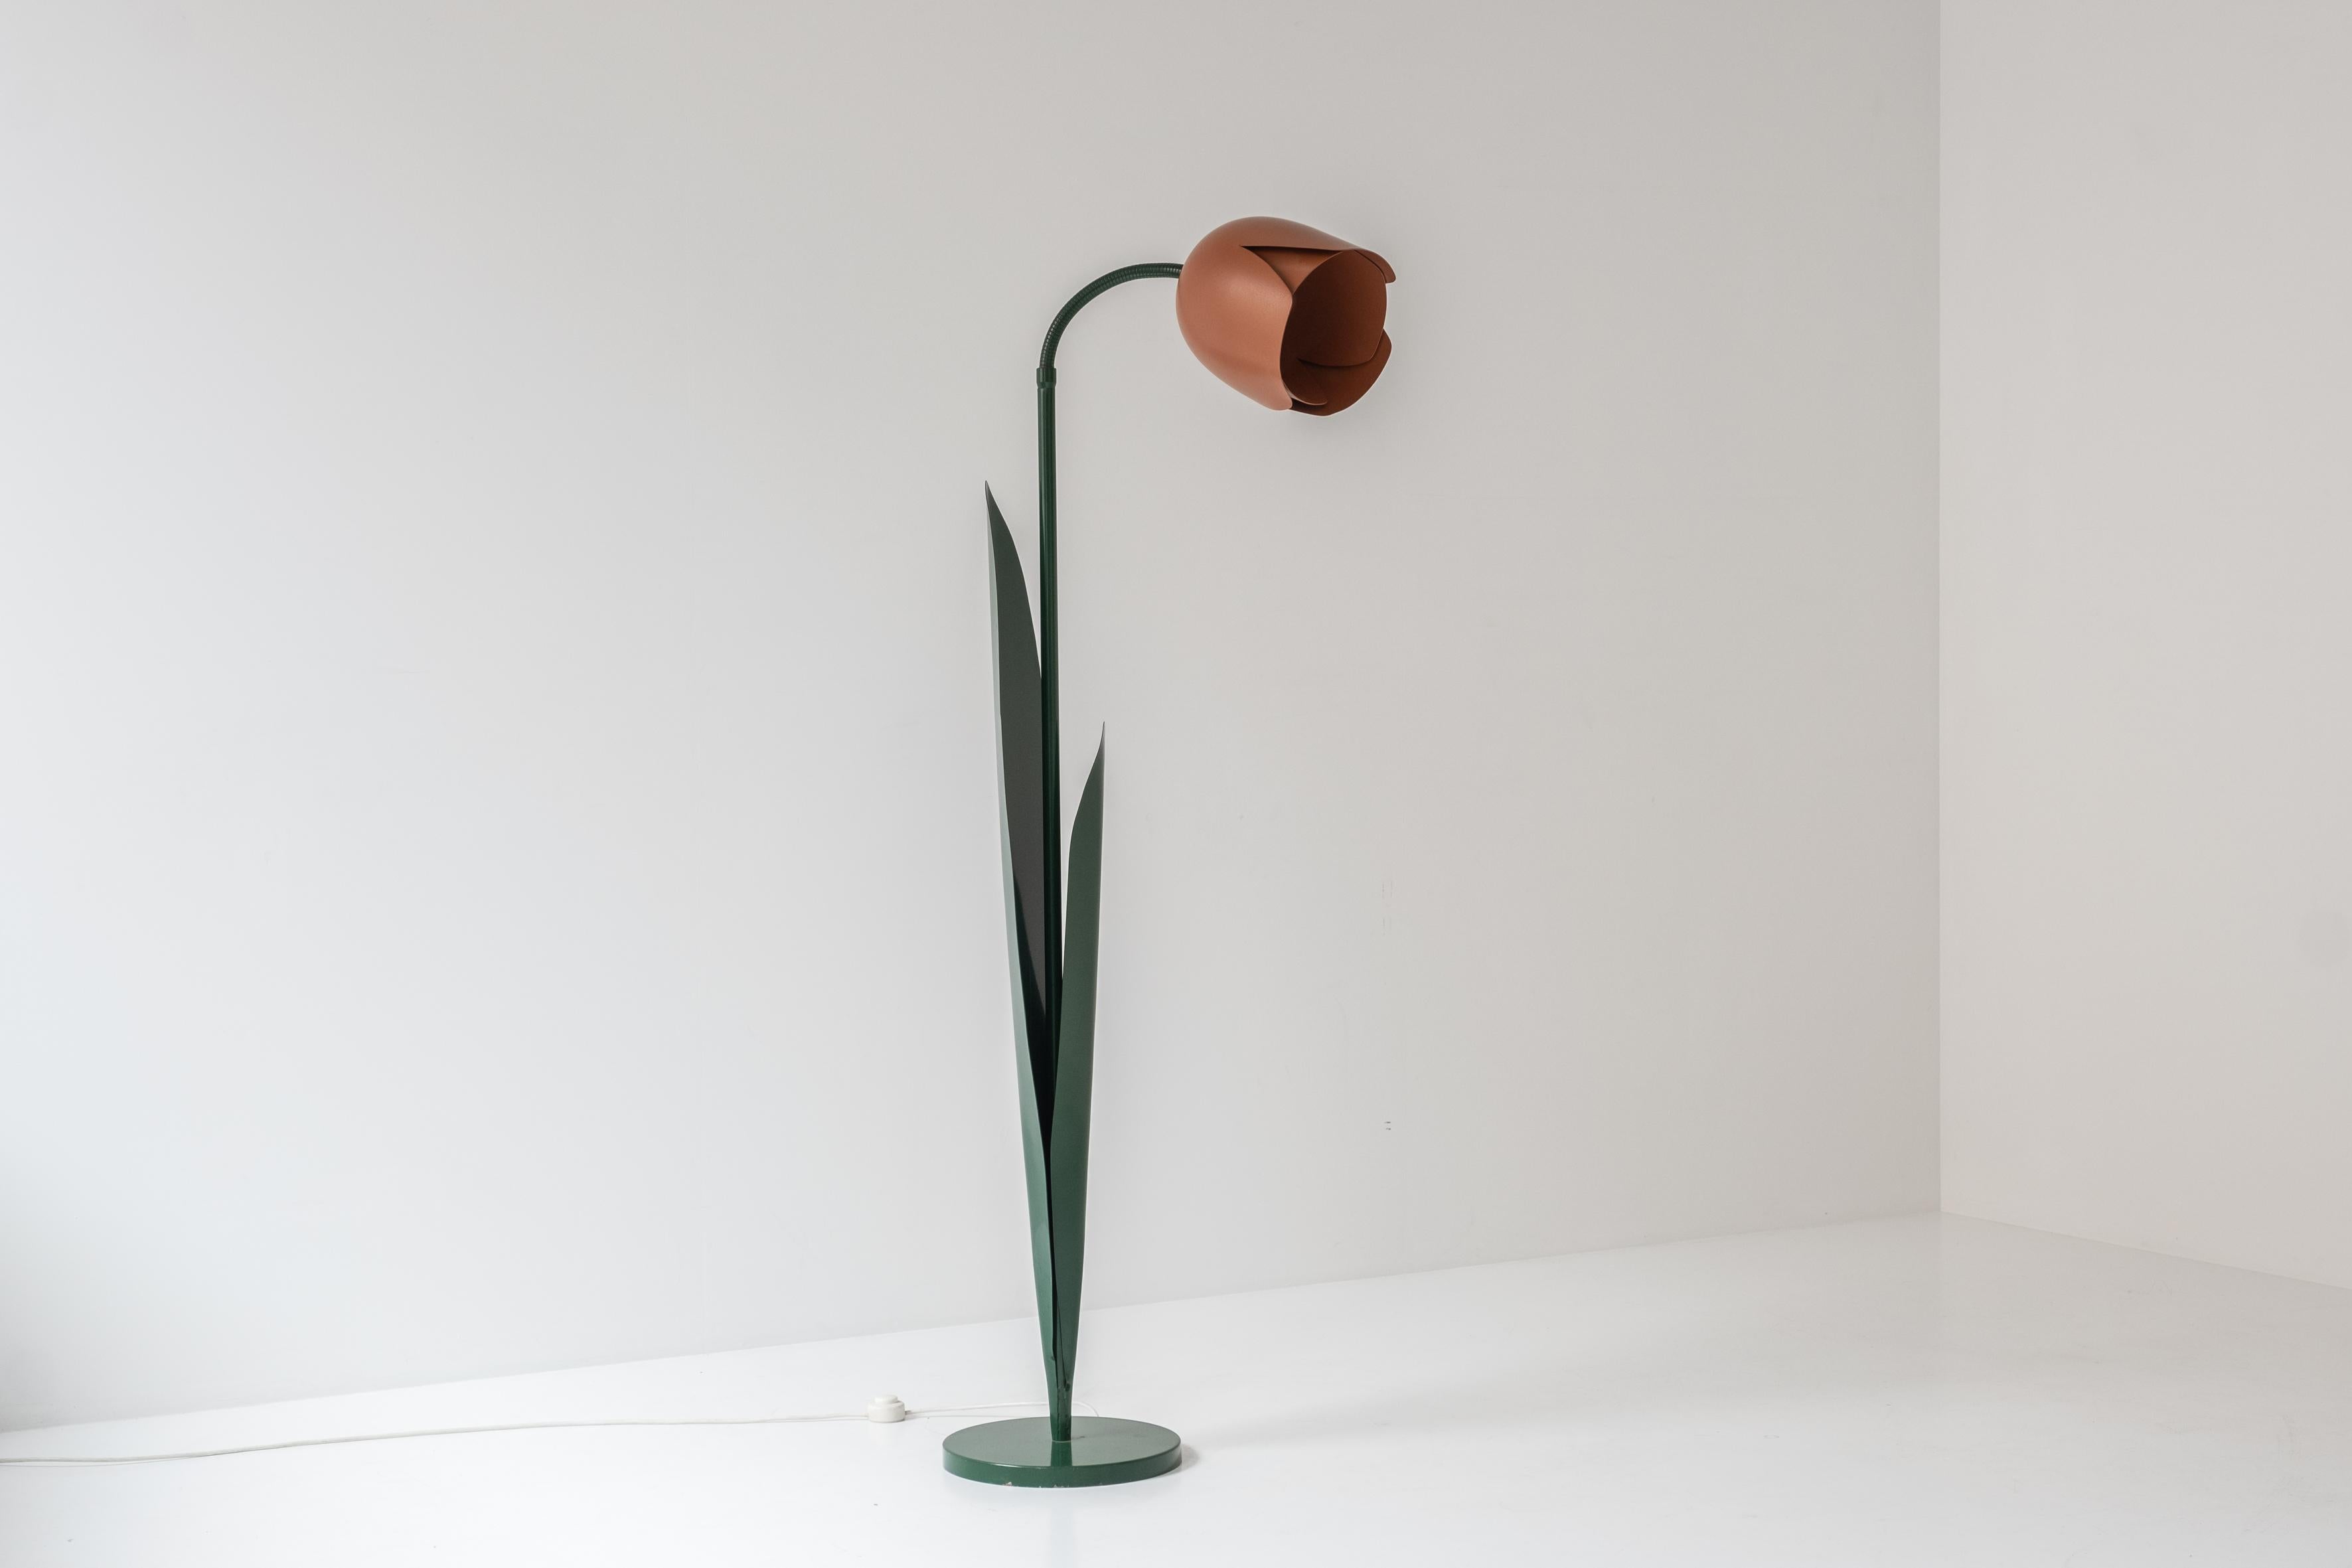 Lovely postmodern tulip flower floor lamp by Peter Bliss for Bliss, UK 1980’s. This floor lamp is made out of enameled metal and remains in its original and untouched condition. Collector’s item.